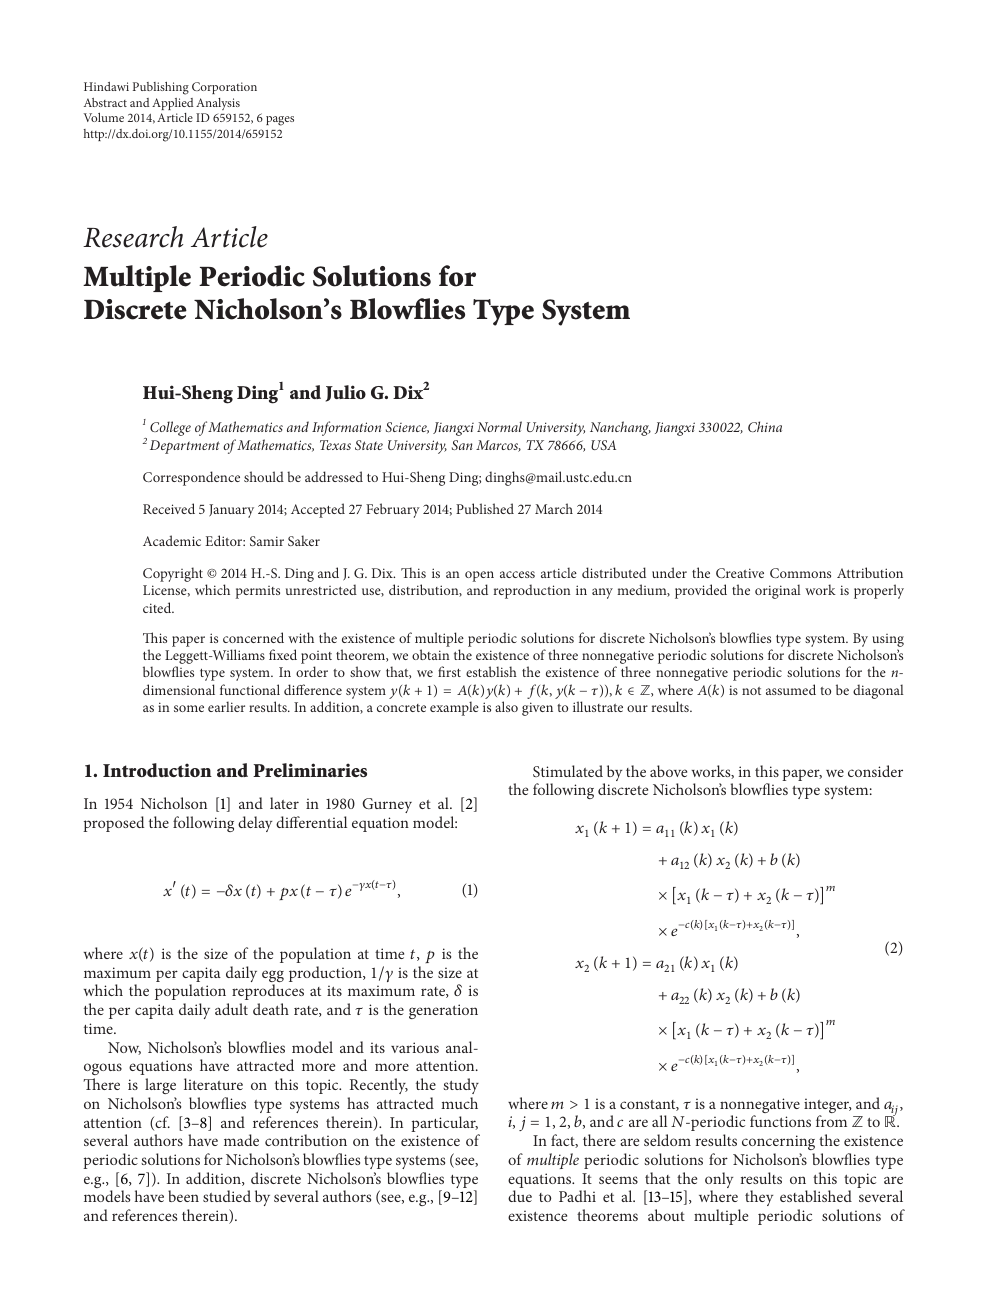 Multiple Periodic Solutions For Discrete Nicholson S Blowflies Type System Topic Of Research Paper In Mathematics Download Scholarly Article Pdf And Read For Free On Cyberleninka Open Science Hub